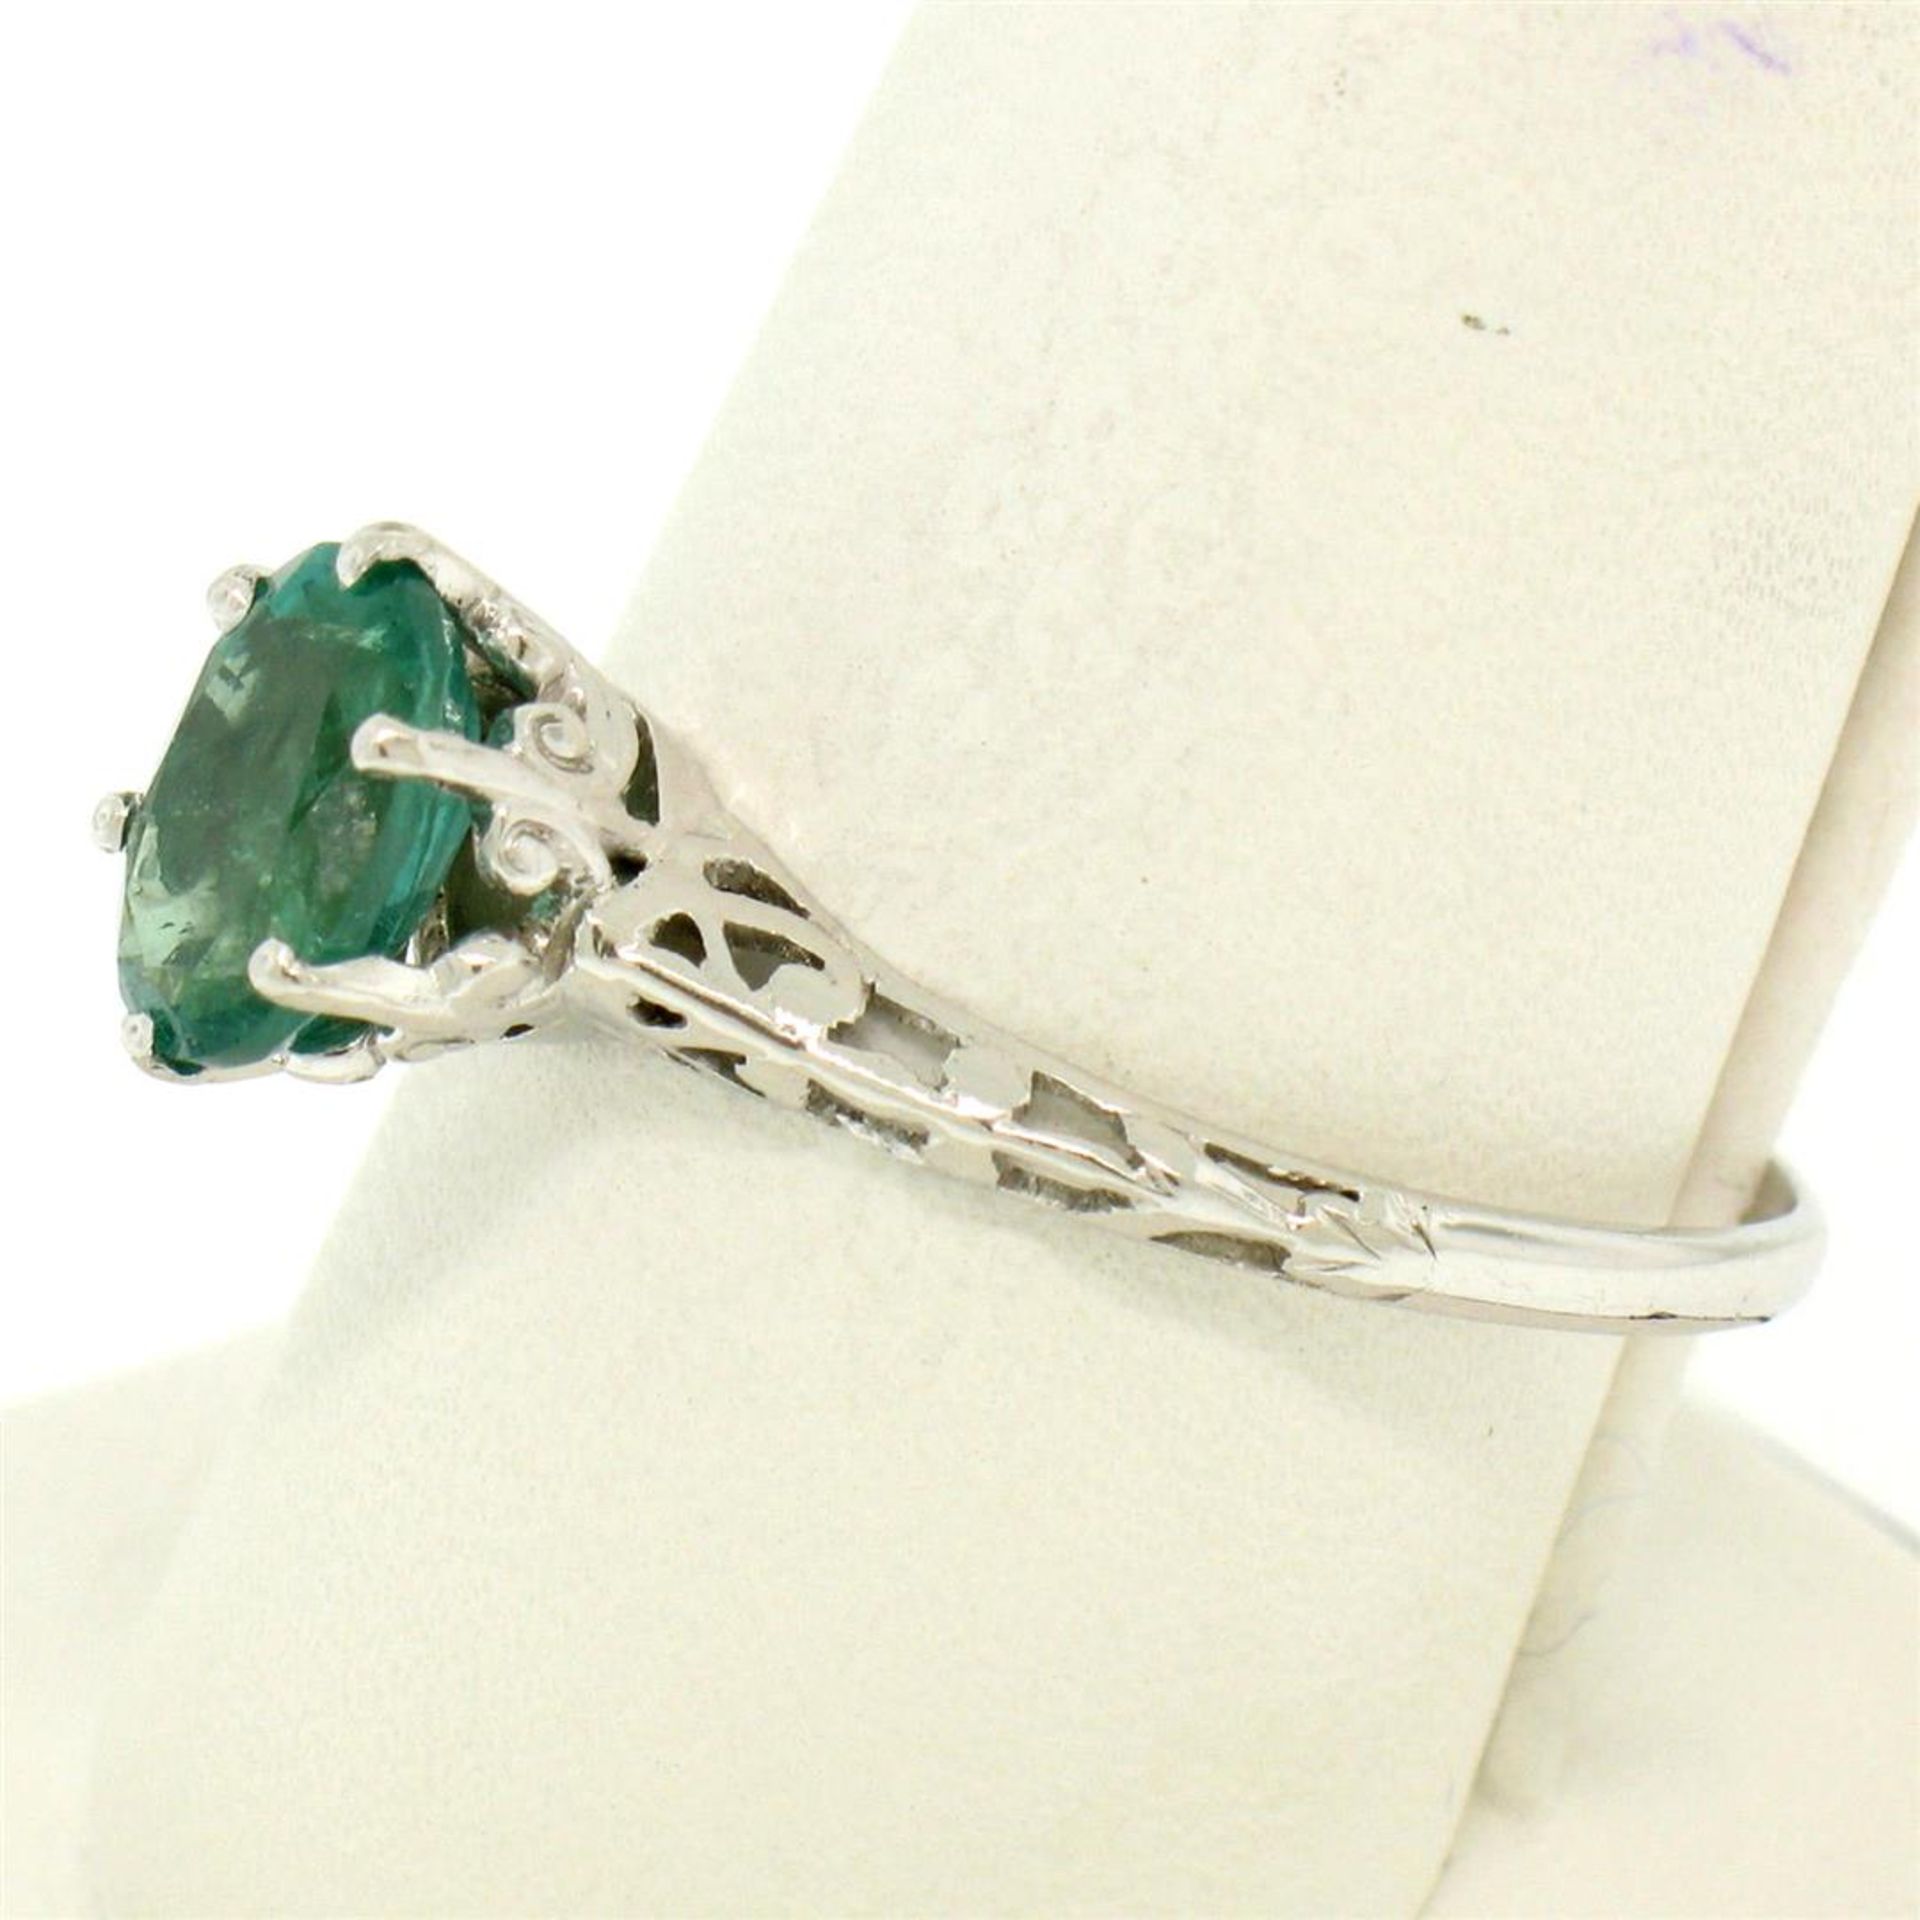 14k White Gold 1.38 ct Prong Set Oval Cut Emerald Filigree Solitaire Ring - Image 6 of 8